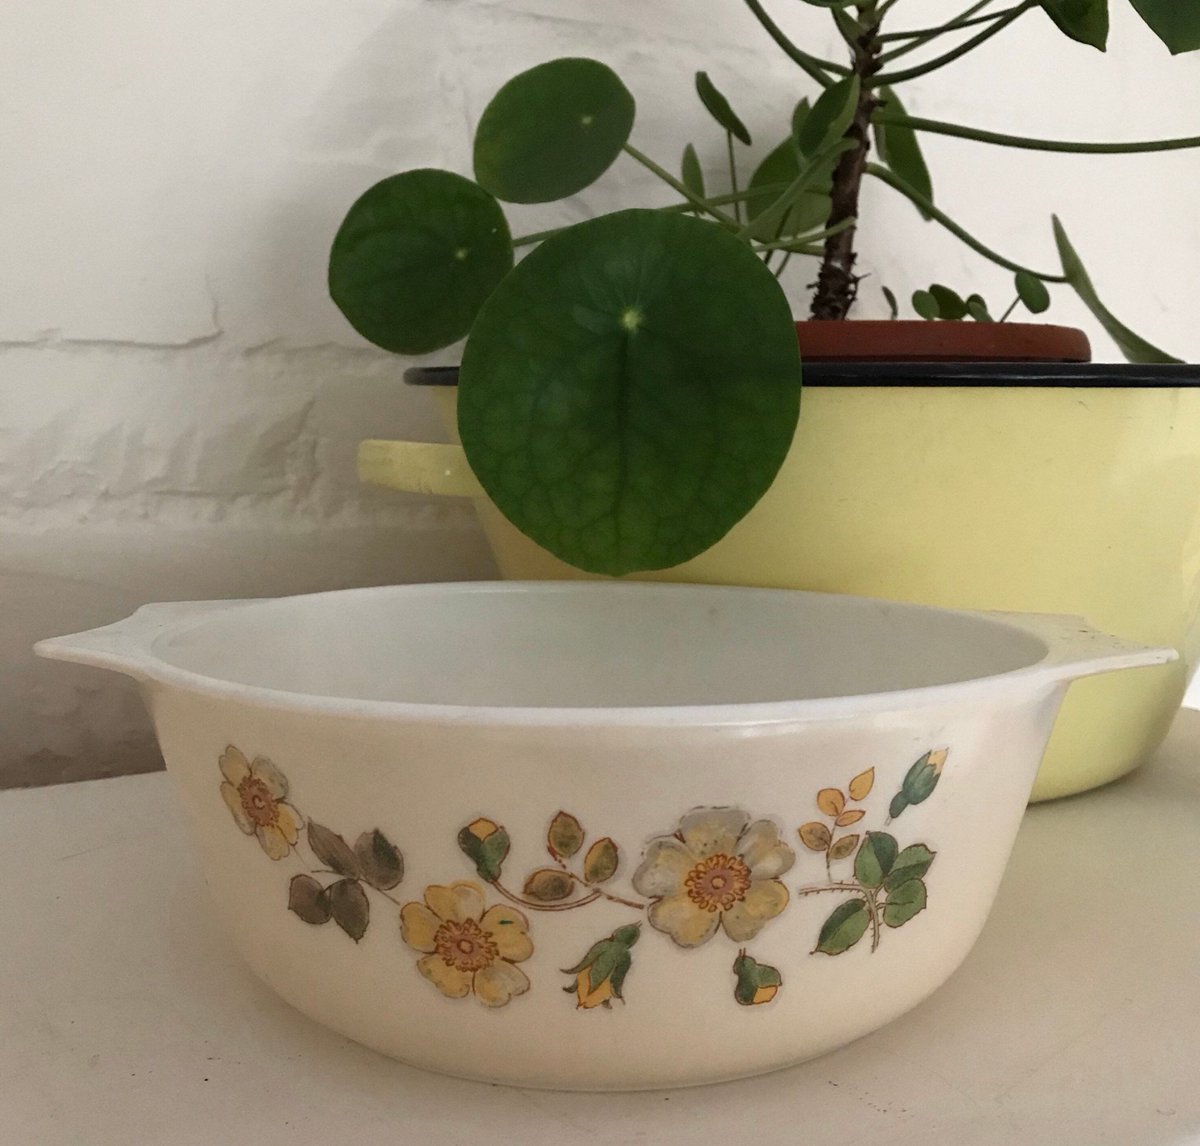 Excited to share this item from my #etsy shop: Pyrex - Marks & Spencer Autumn Leaves Casserole Dish. etsy.me/2pLj0t9
#vintage #vintageforsale #VintageEtsy #vintagepyrex #pyrex